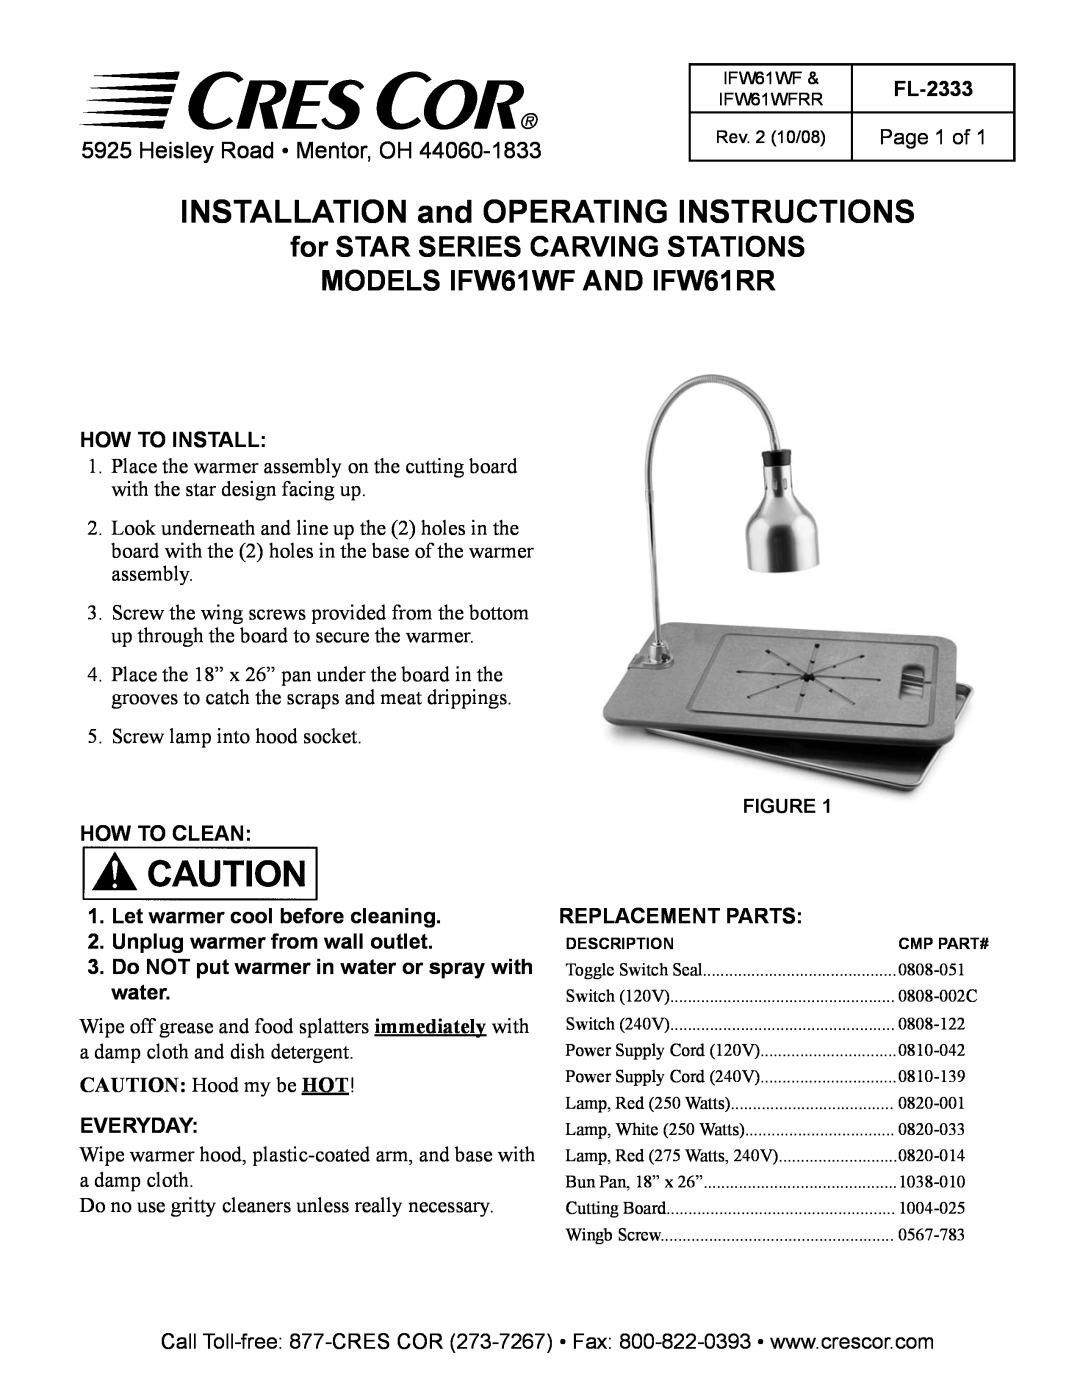 Cres Cor IFW61RR manual INSTALLATION and OPERATING INSTRUCTIONS, for STAR SERIES CARVING STATIONS, Heisley Road Mentor, OH 